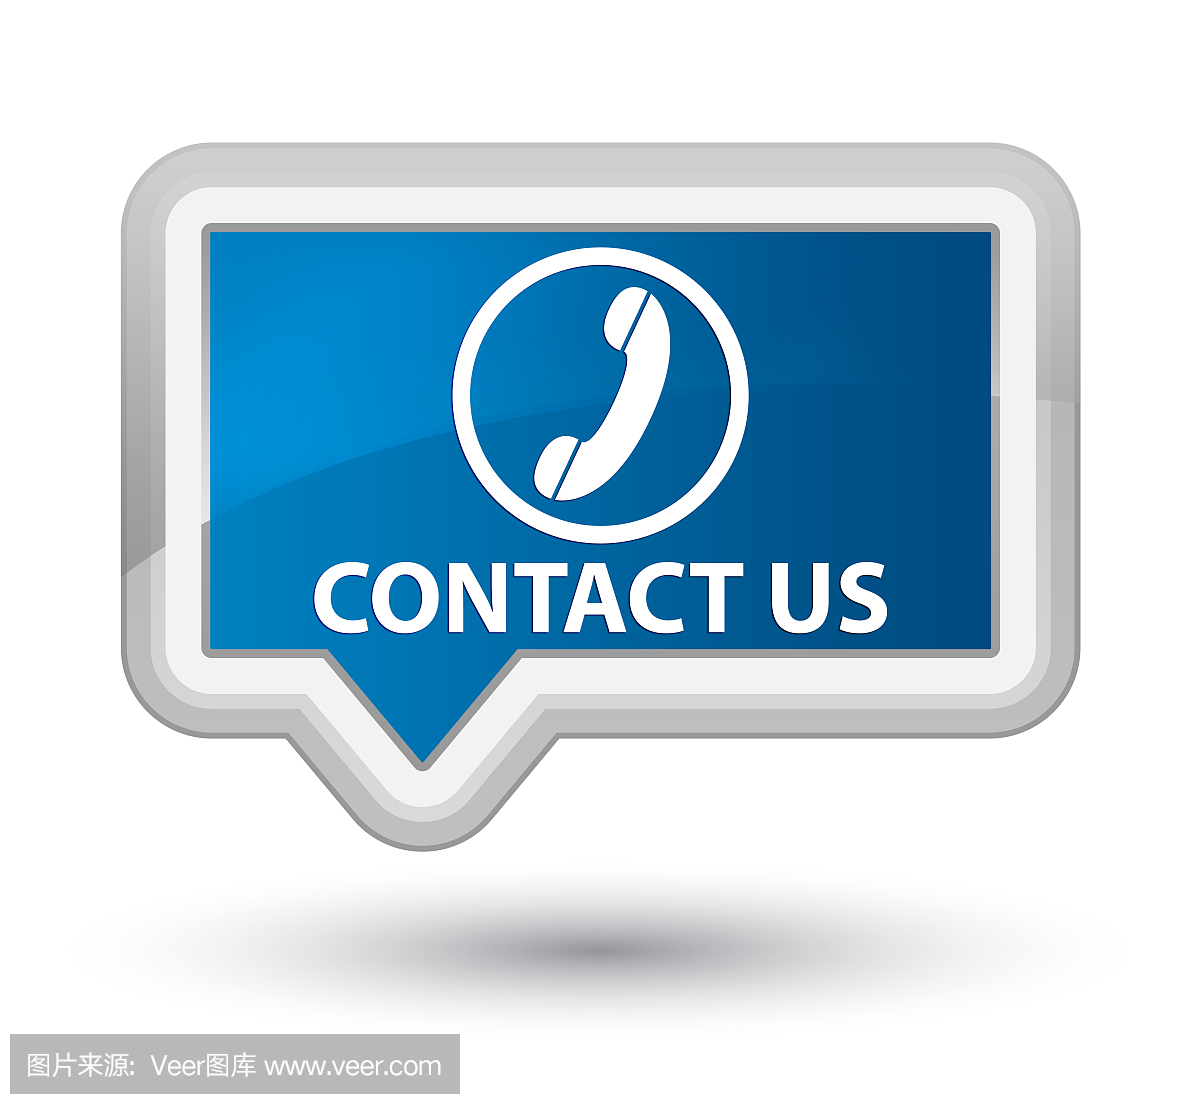 Contact us (phone icon) prime blue banner butt